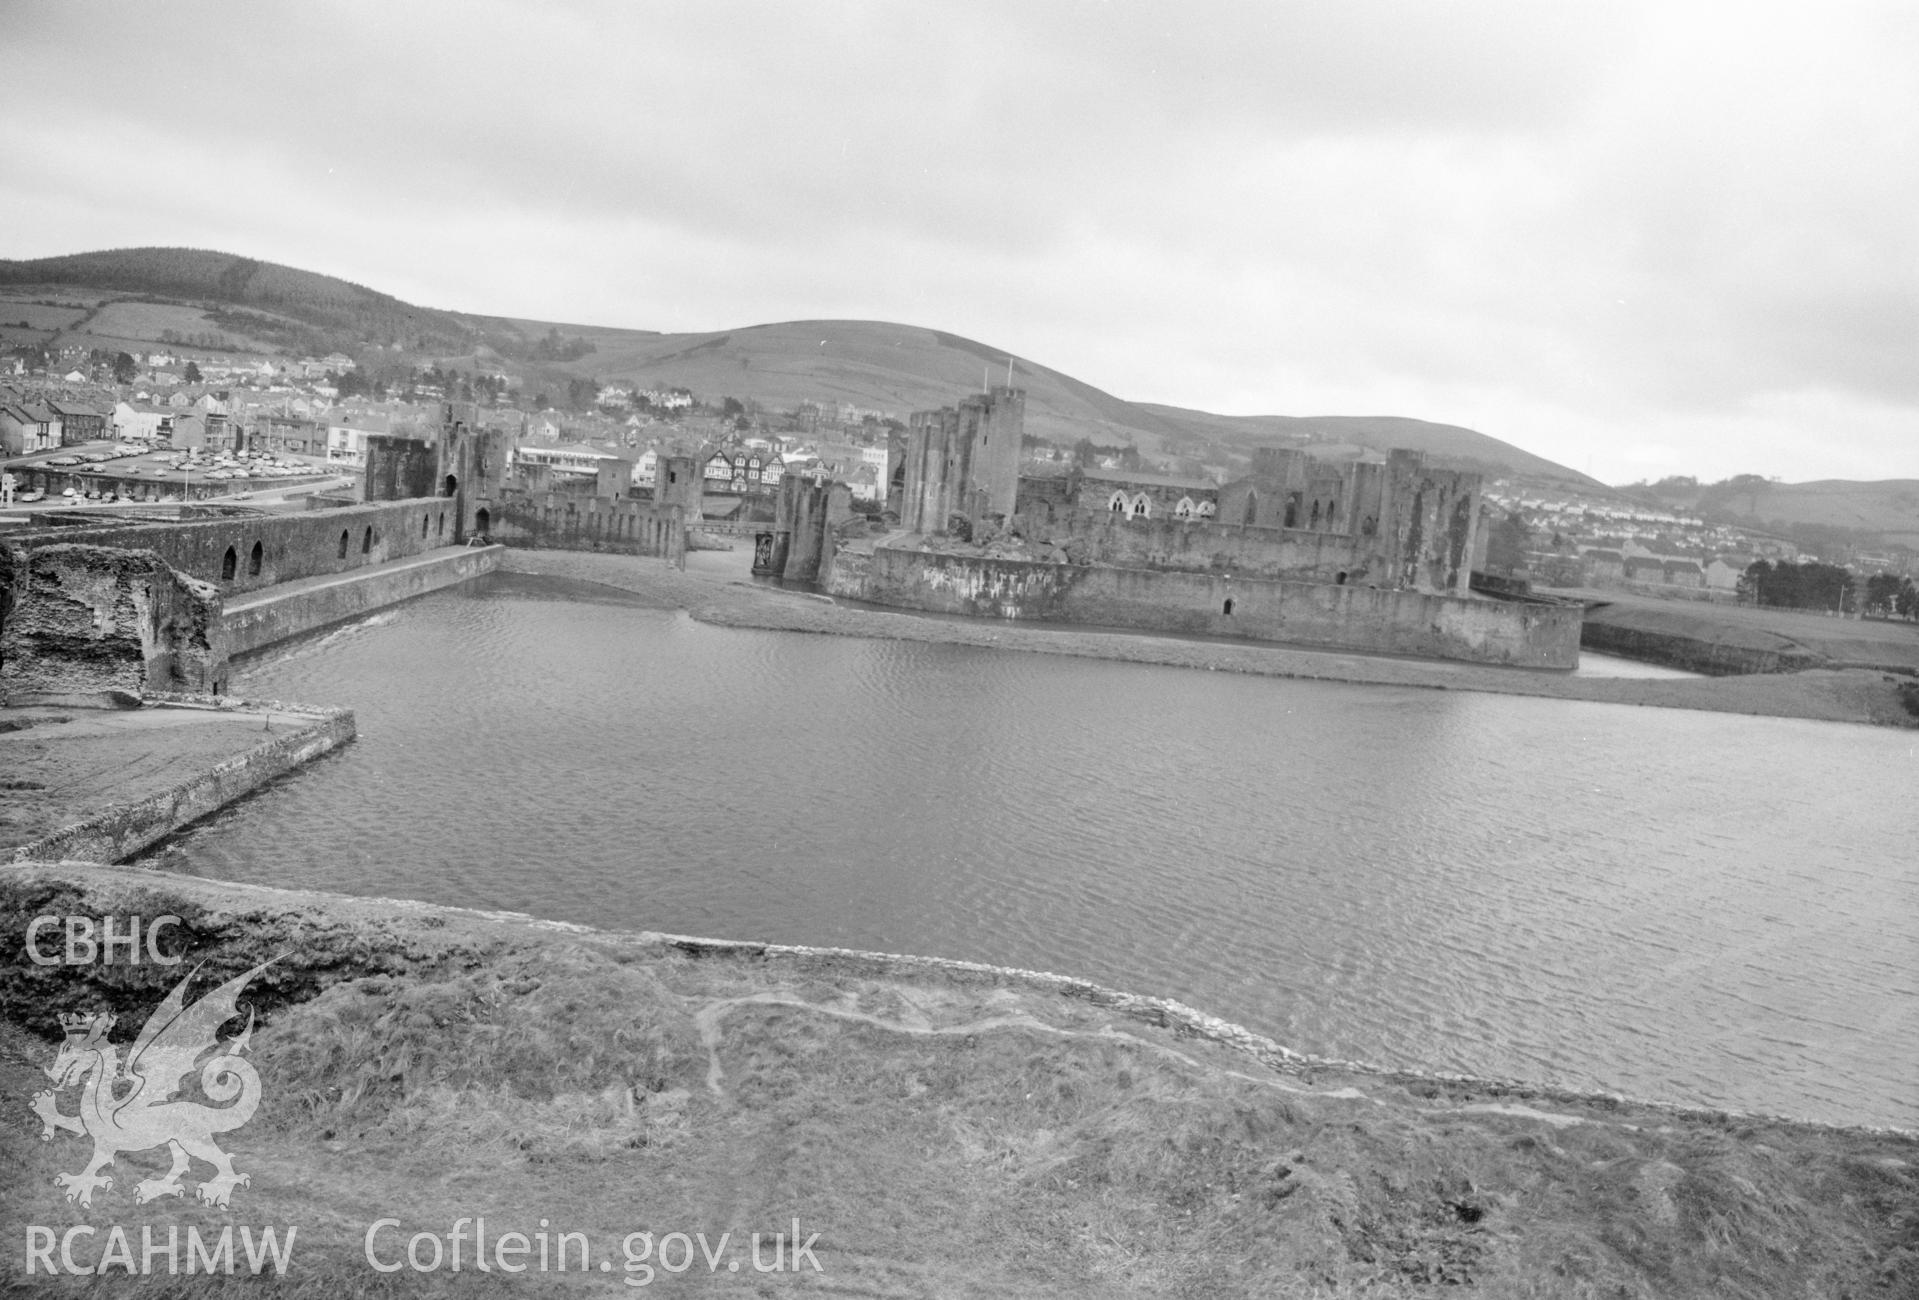 Digital copy of a black and white negative showing Caerphilly Castle.